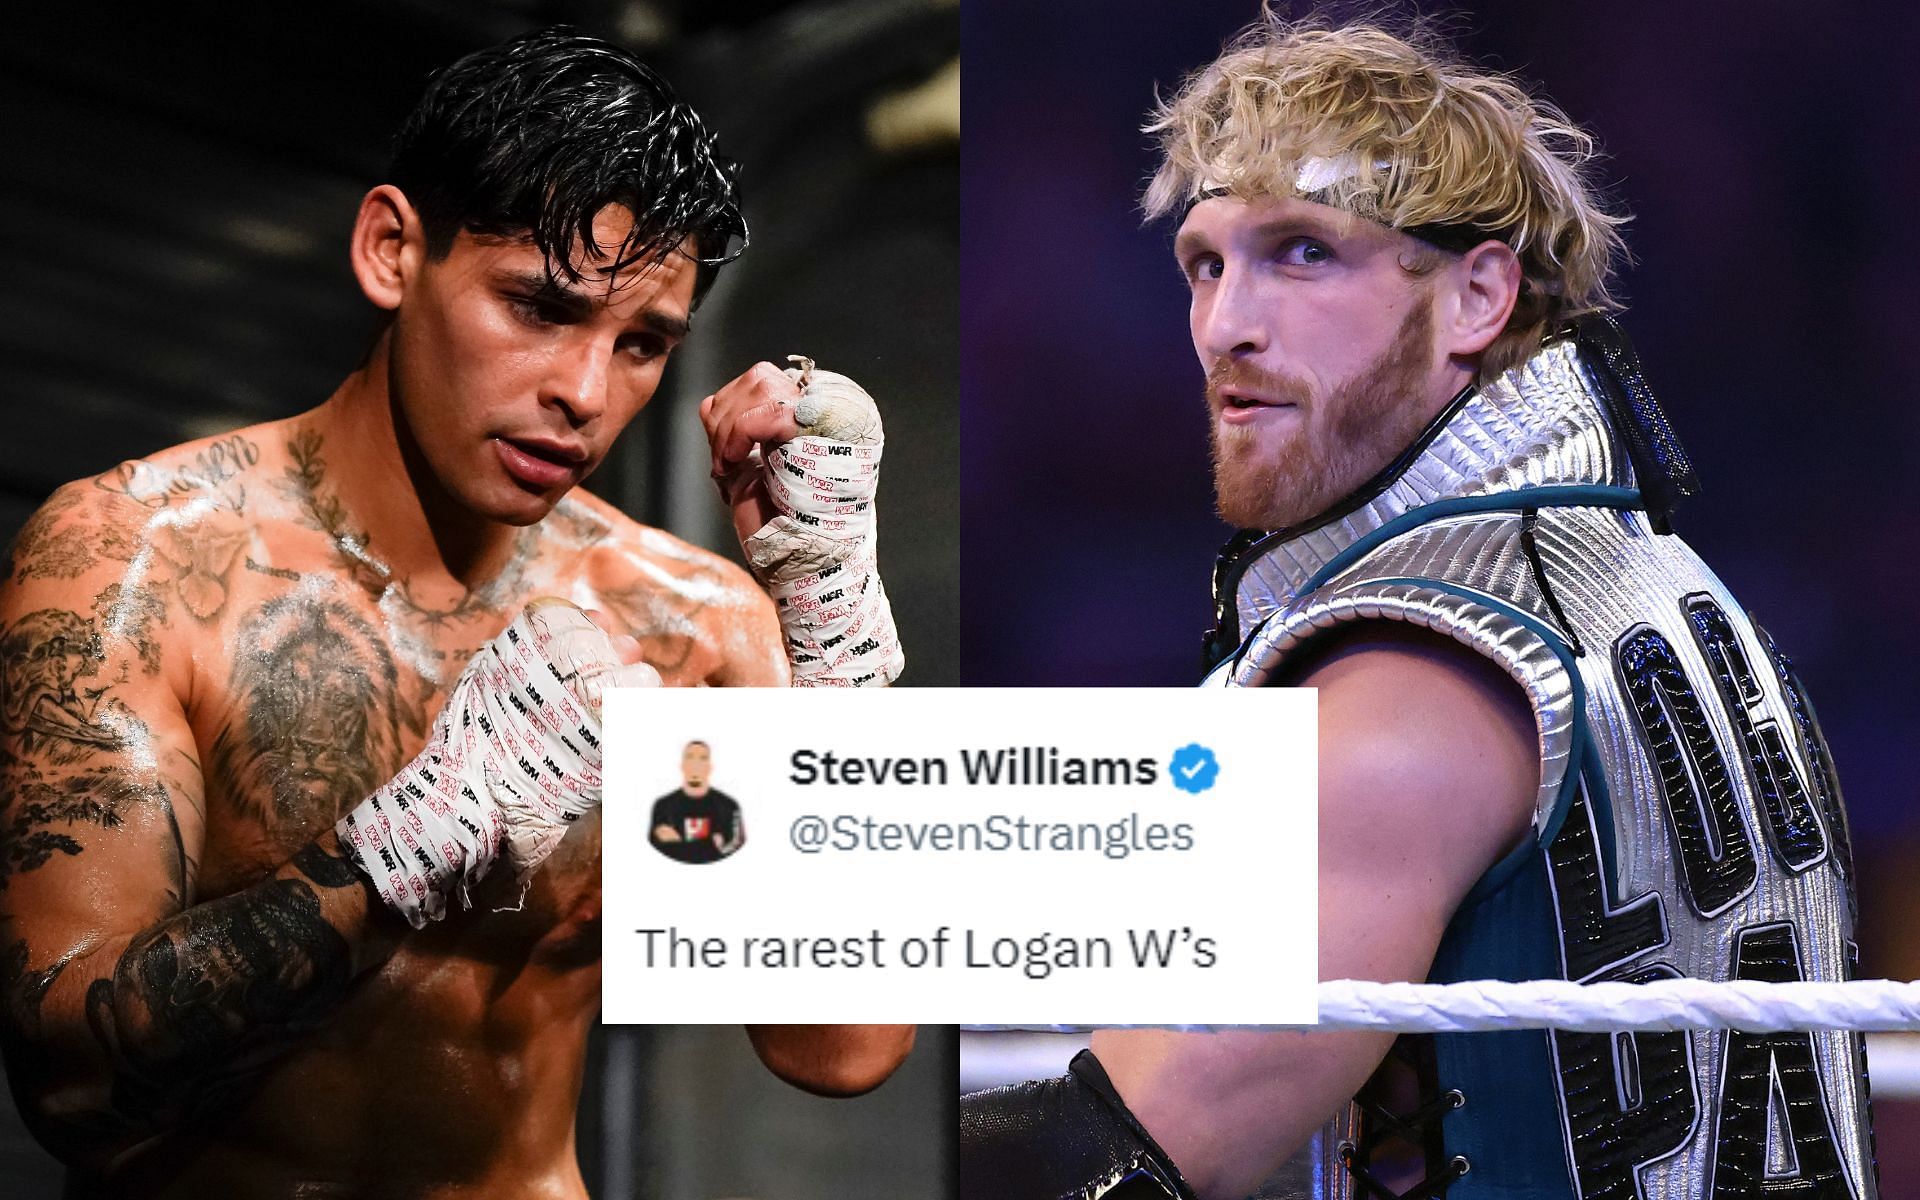 Ryan Garcia (left) is one of the most popular boxers in the world today, whereas Logan Paul (right) is a famous influencer and WWE superstar [Images courtesy: Getty Images]